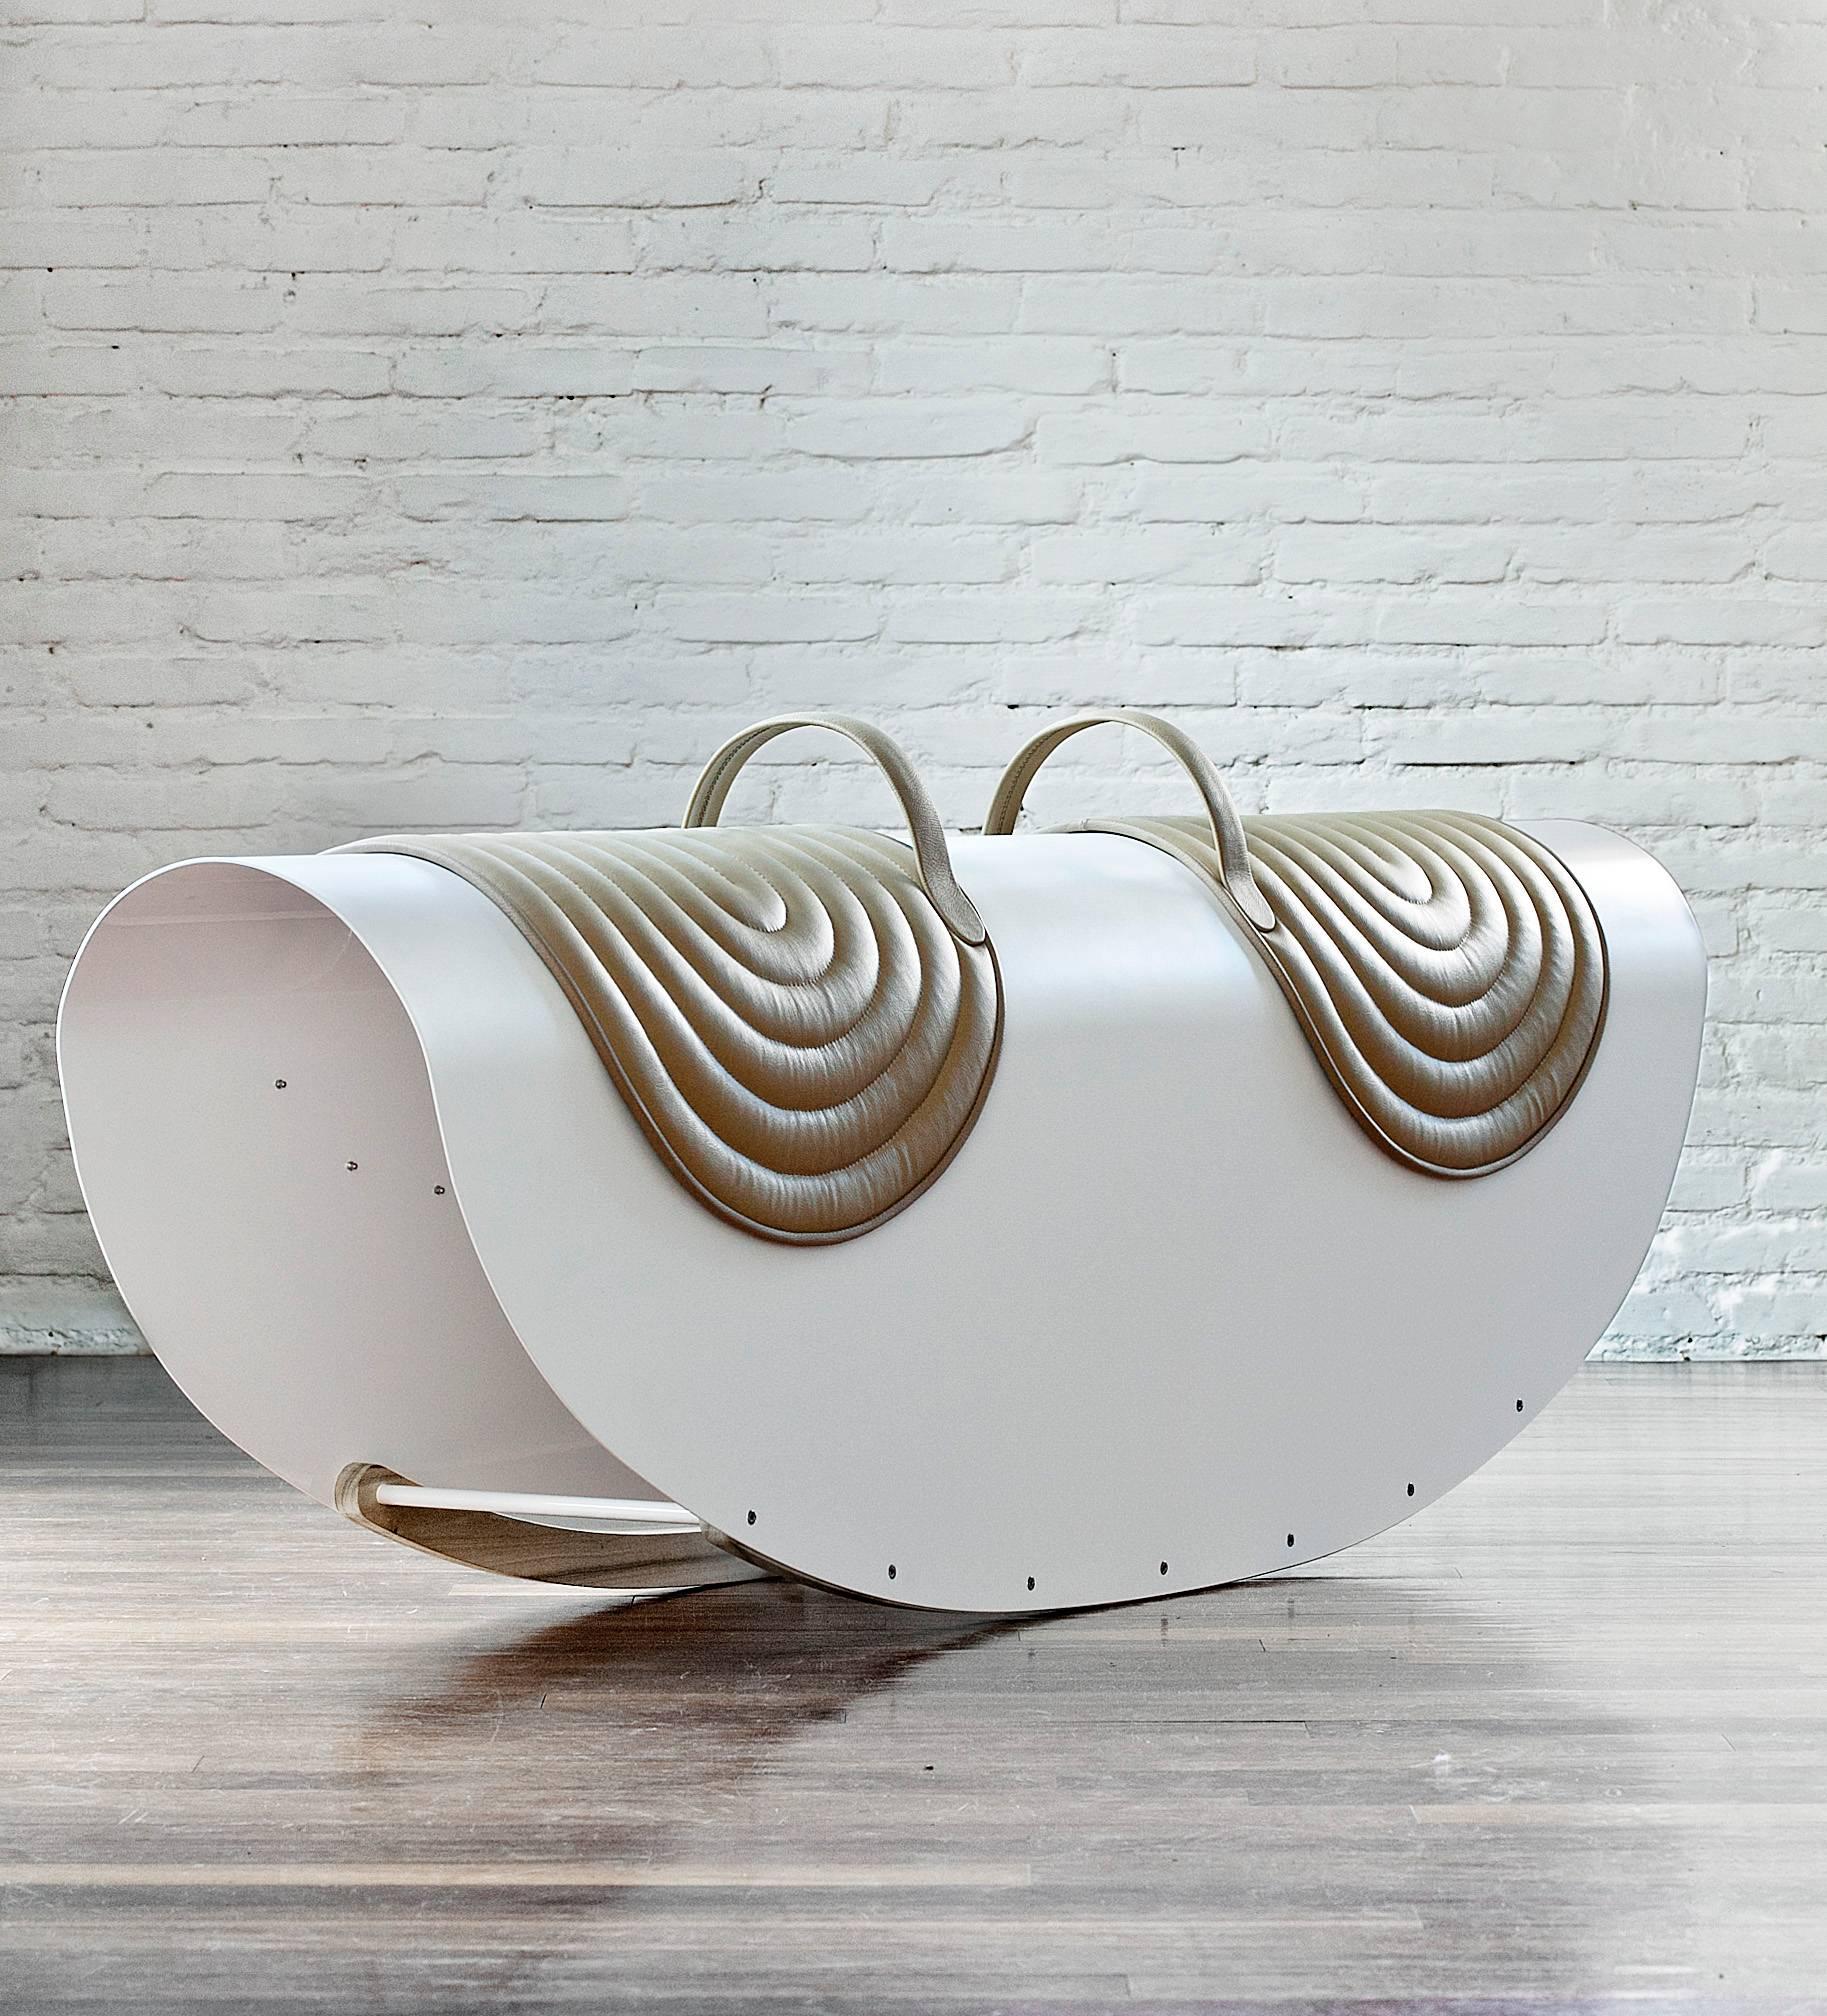 With this Rocker, Lanzavecchia and Wai demonstrate how children’s play, through a sophisticated design process, can be transformed into refined grown-up objects with meaning and intent. It combines skillful craftsmanship with serial production and